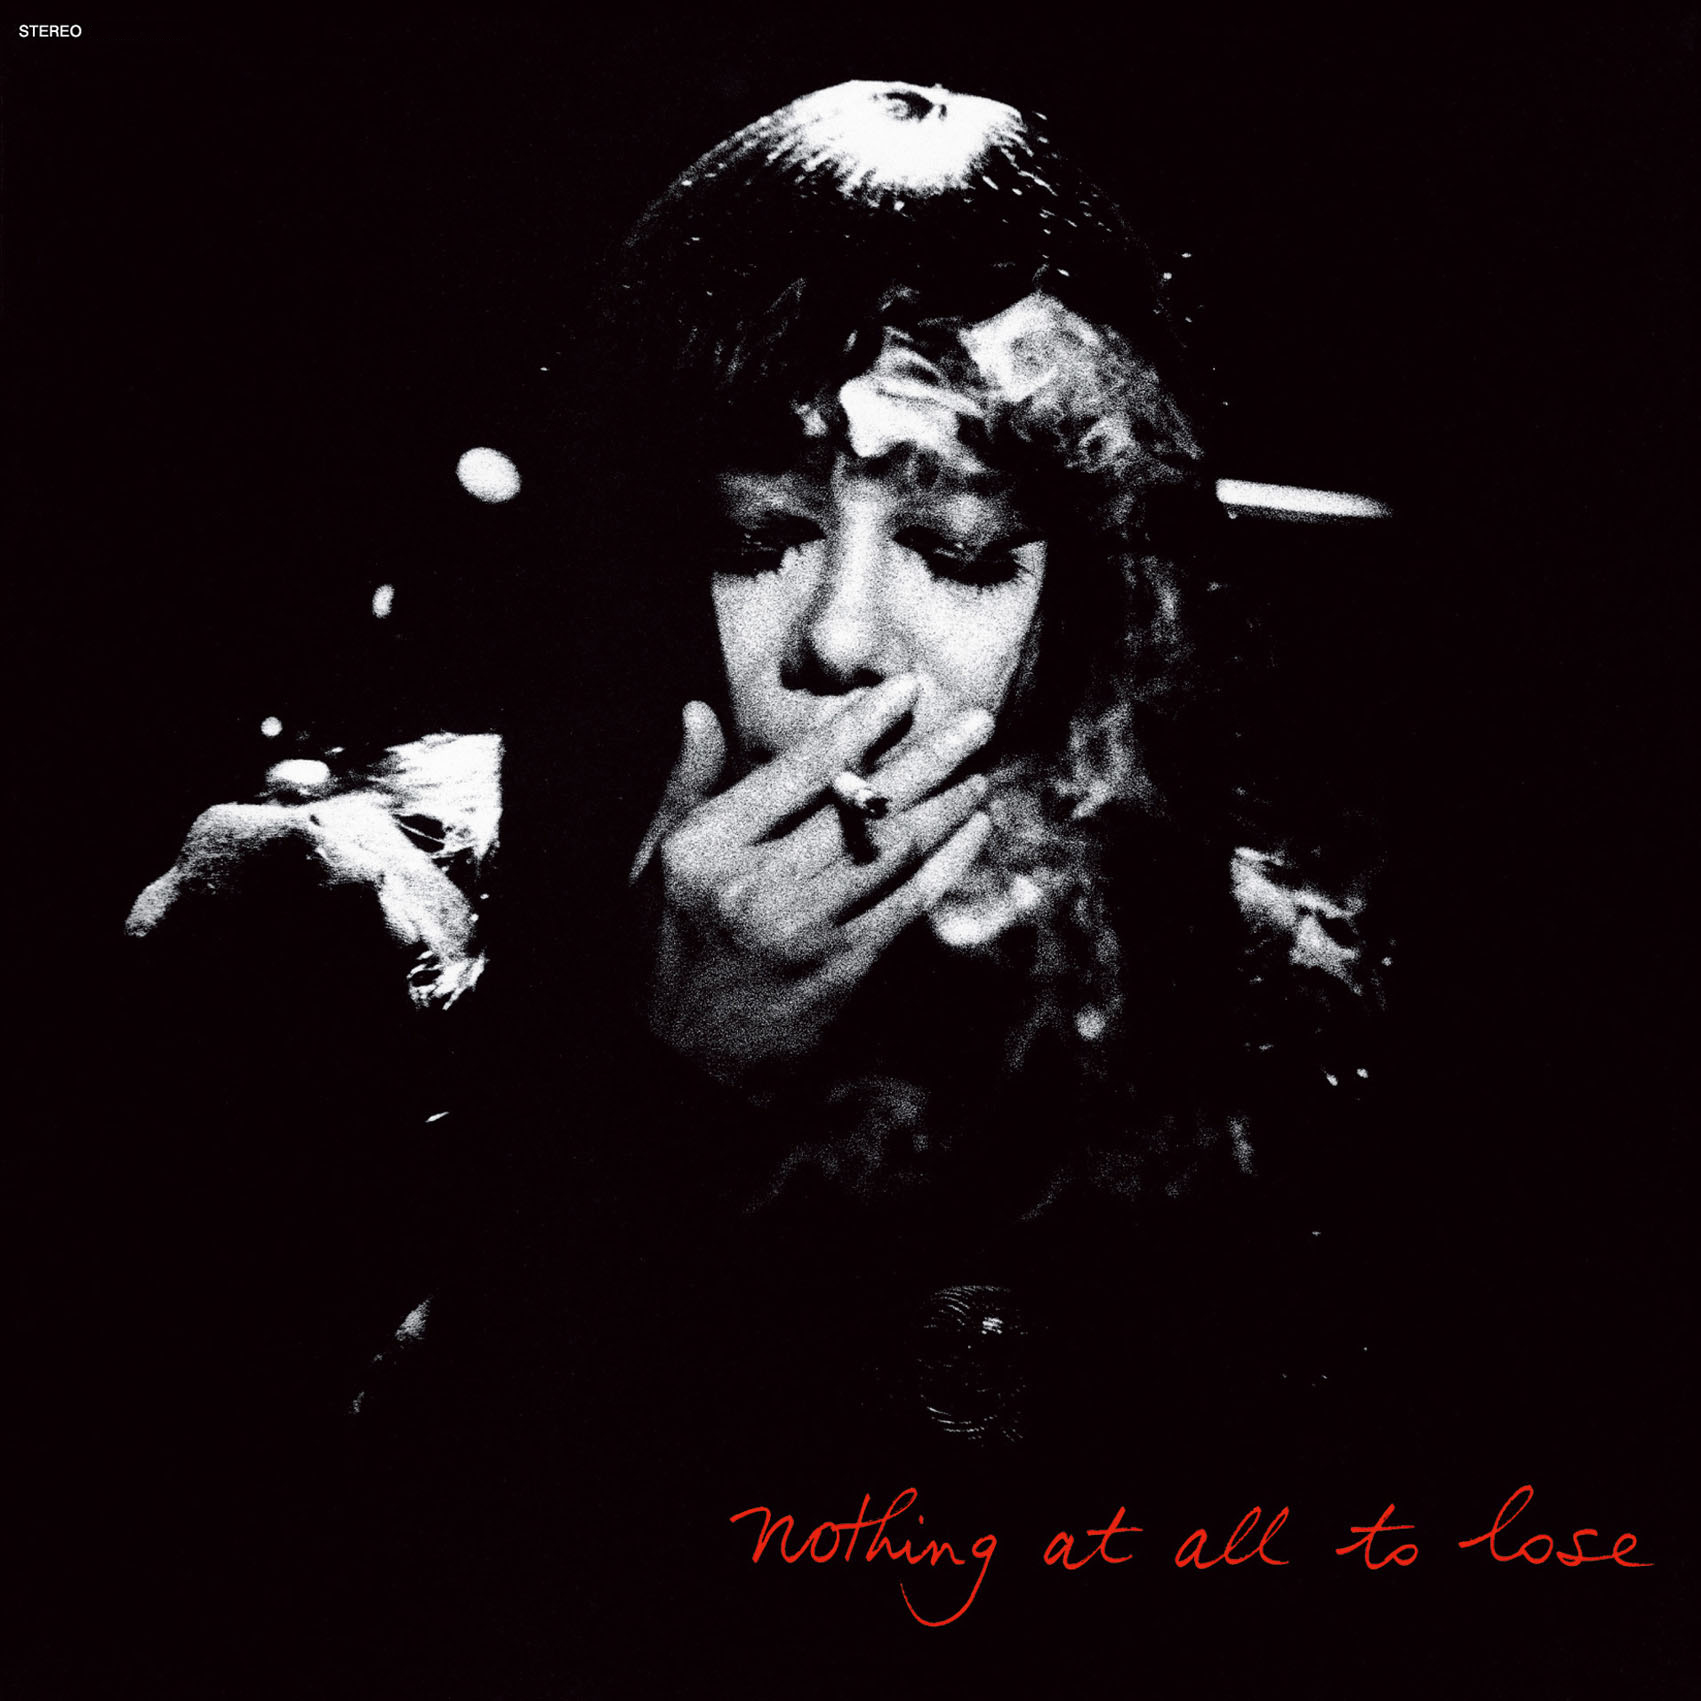 NOTHING AT ALL TO LOSE (LP)